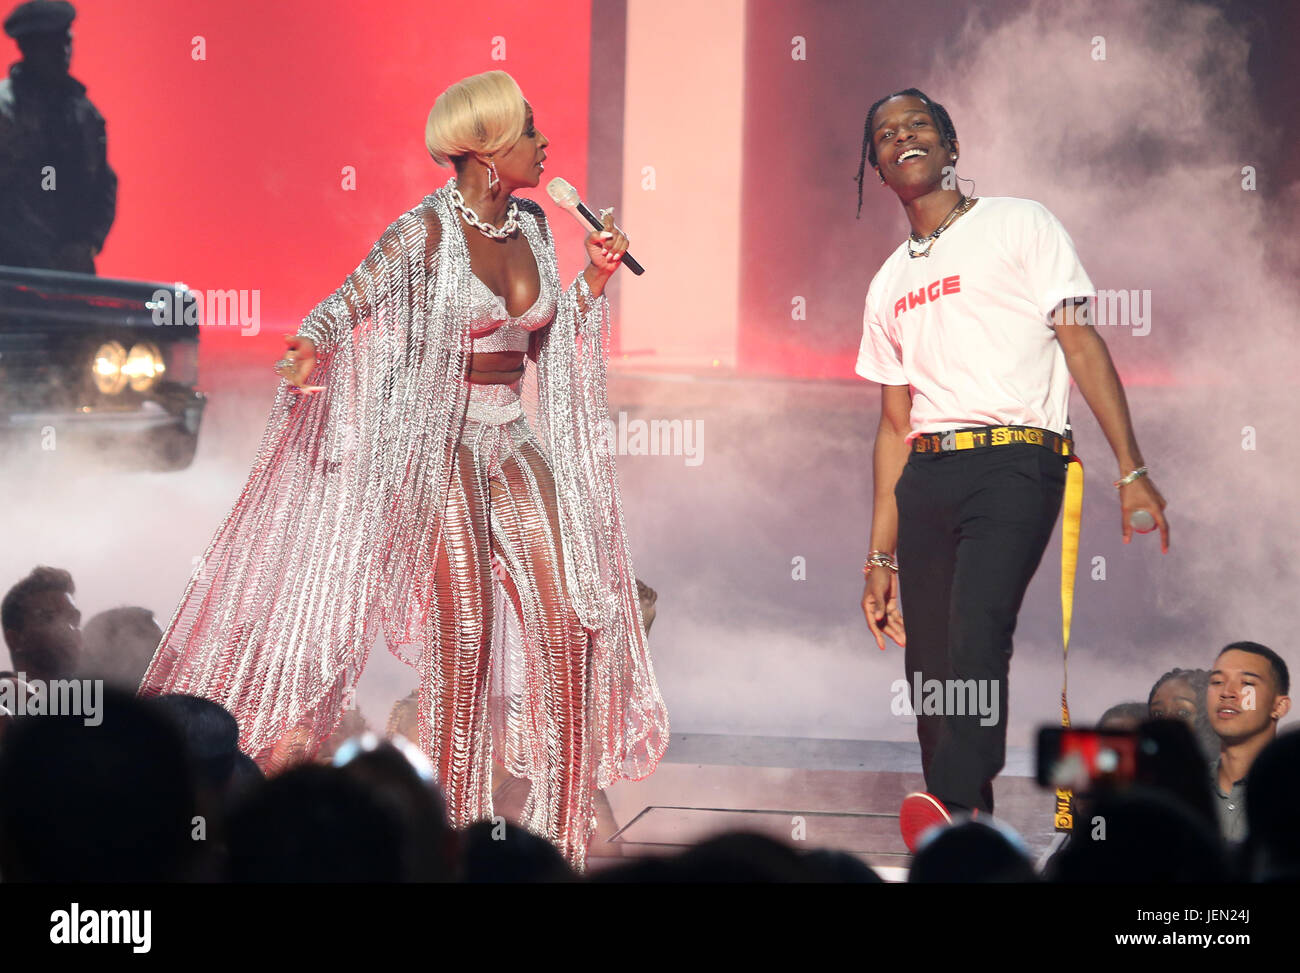 LOS ANGELES, CA - JUNE 25: Mary J. Blige and Asap Rocky at BET Awards 17 Show at the Microsoft Theater in Los Angeles, California on June 25, 2017. Credit: Faye Sadou/MediaPunch Stock Photo